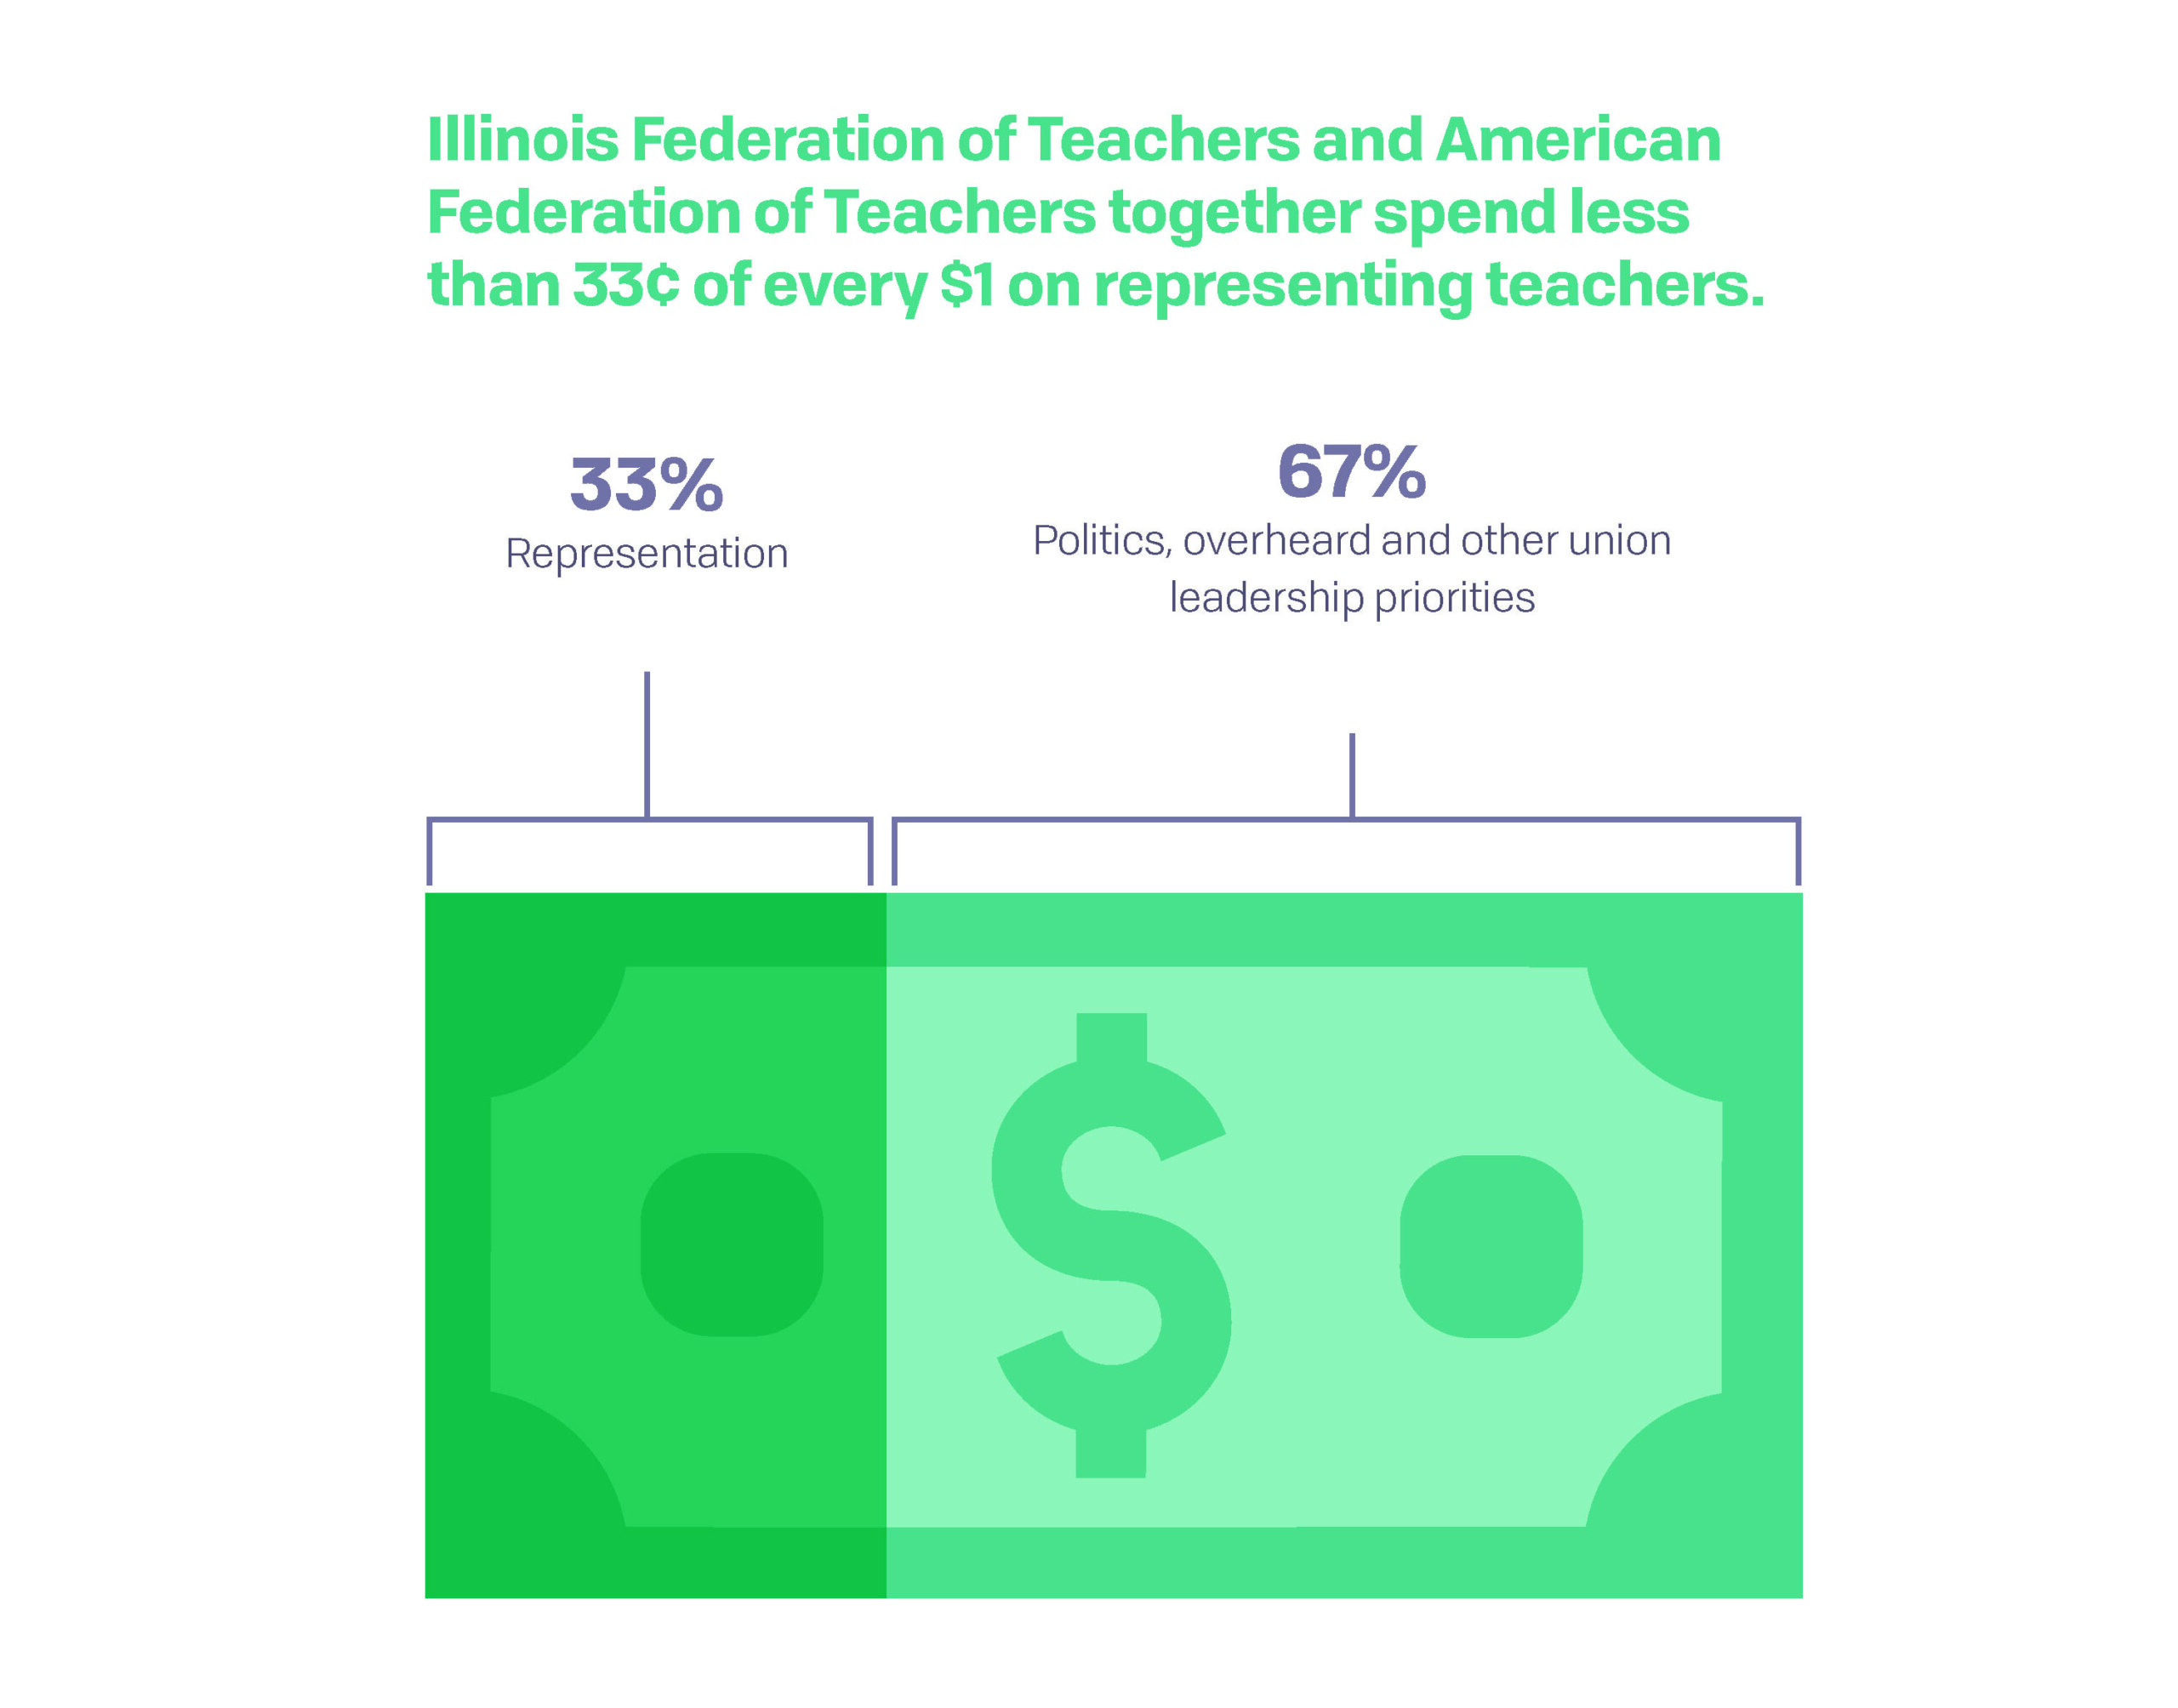 Illinois Federation of Teachers and American Federation of Teachers together spend less than 33¢ of every $1 on representing teachers.